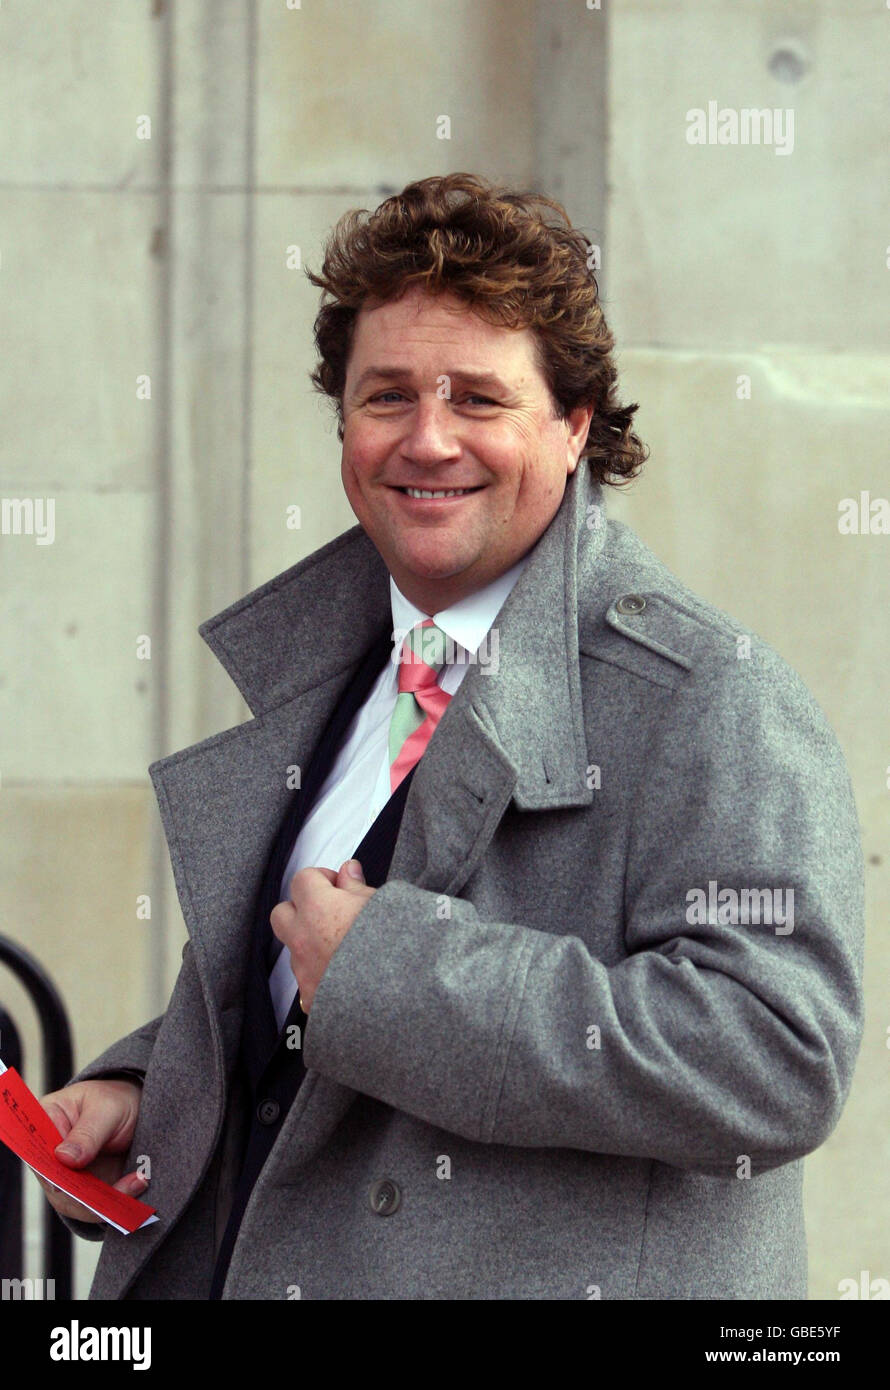 Michael Ball attends a memorial service for Sir Bill Cotton, the BBC light entertainment executive, at St Martins-in-the-Fields, Trafalgar Square, London. Stock Photo